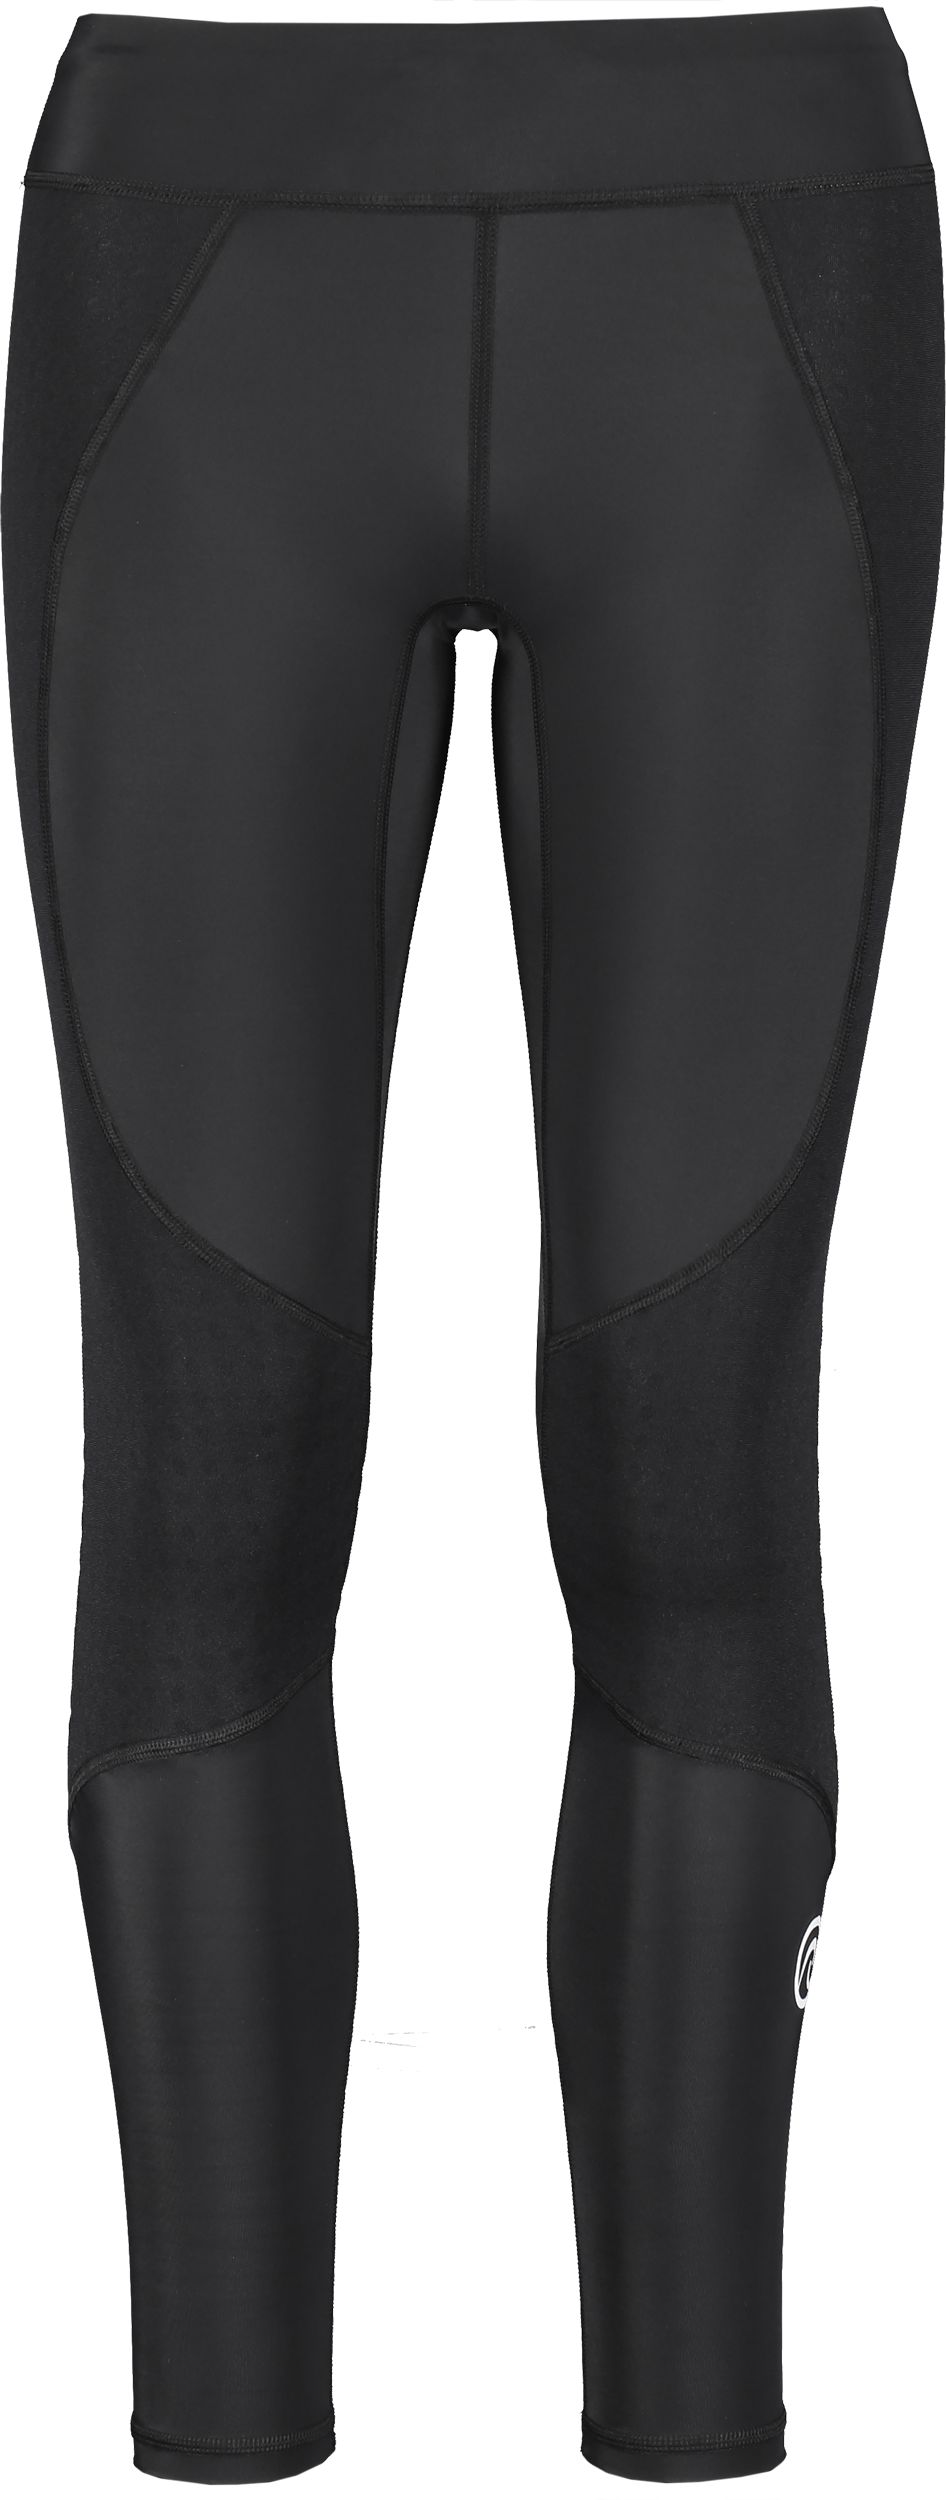 REHBAND, RUNNERS KNEE ITBS TIGHTS